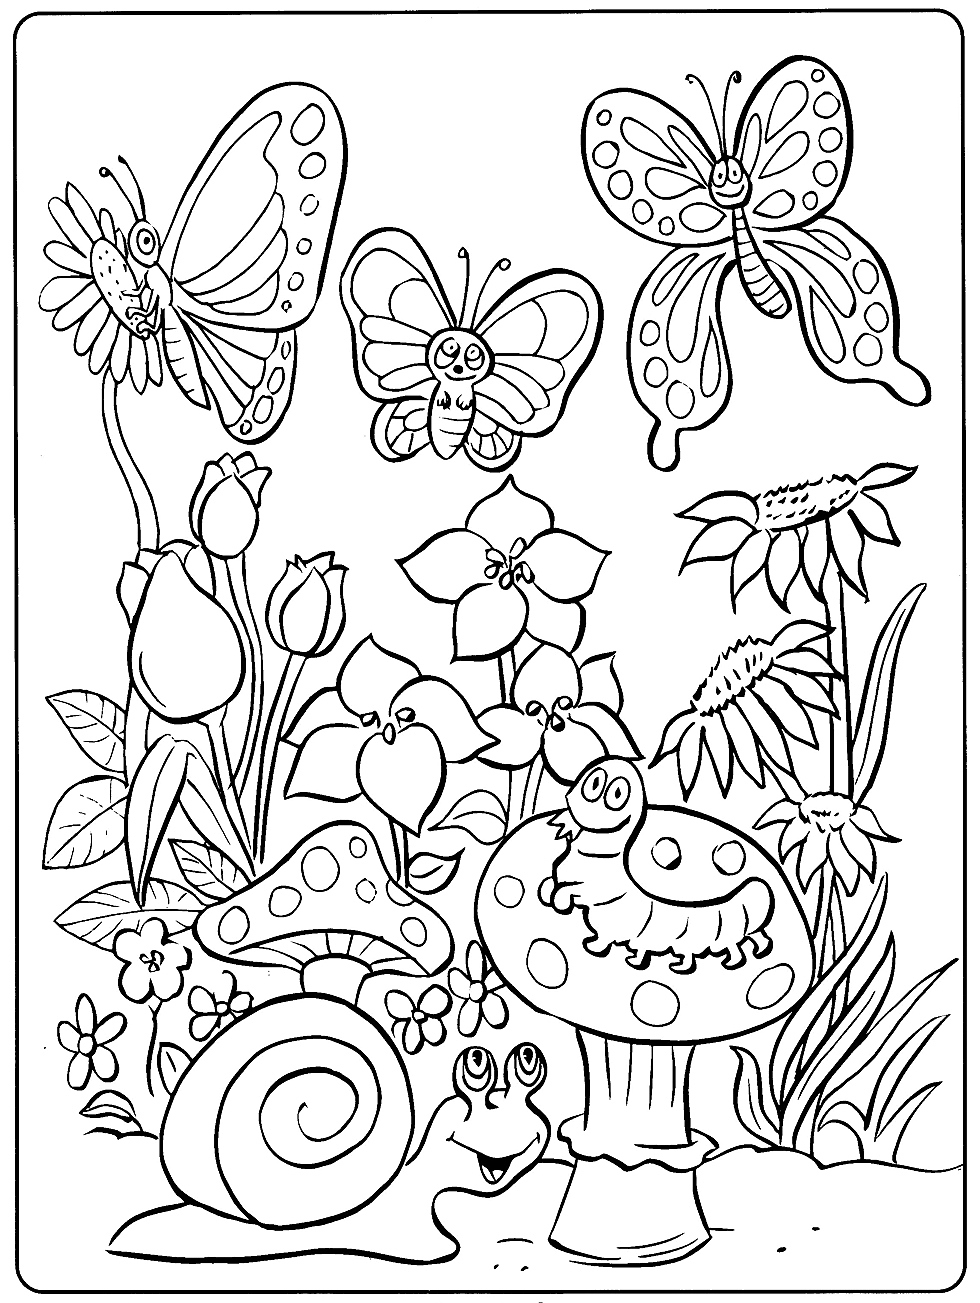 coloring pages printable animals Animal coloring pages (7) klikplayer